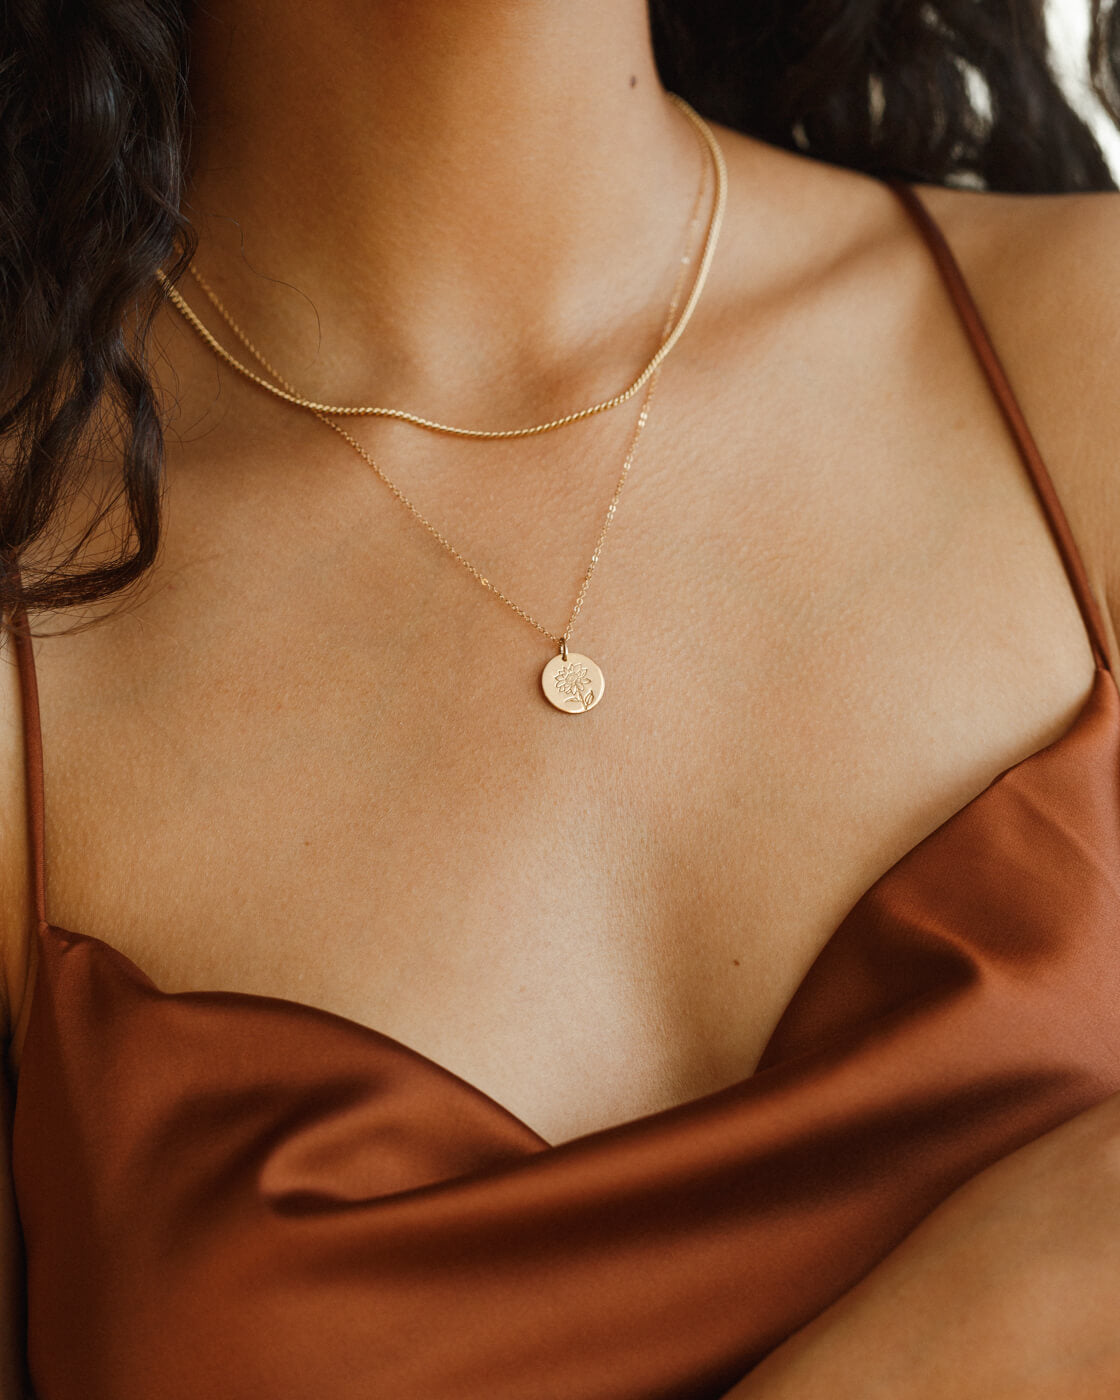 Solid Gold 9ct 'Petite Wildflower' Necklace – BY IMOGEN ROSE